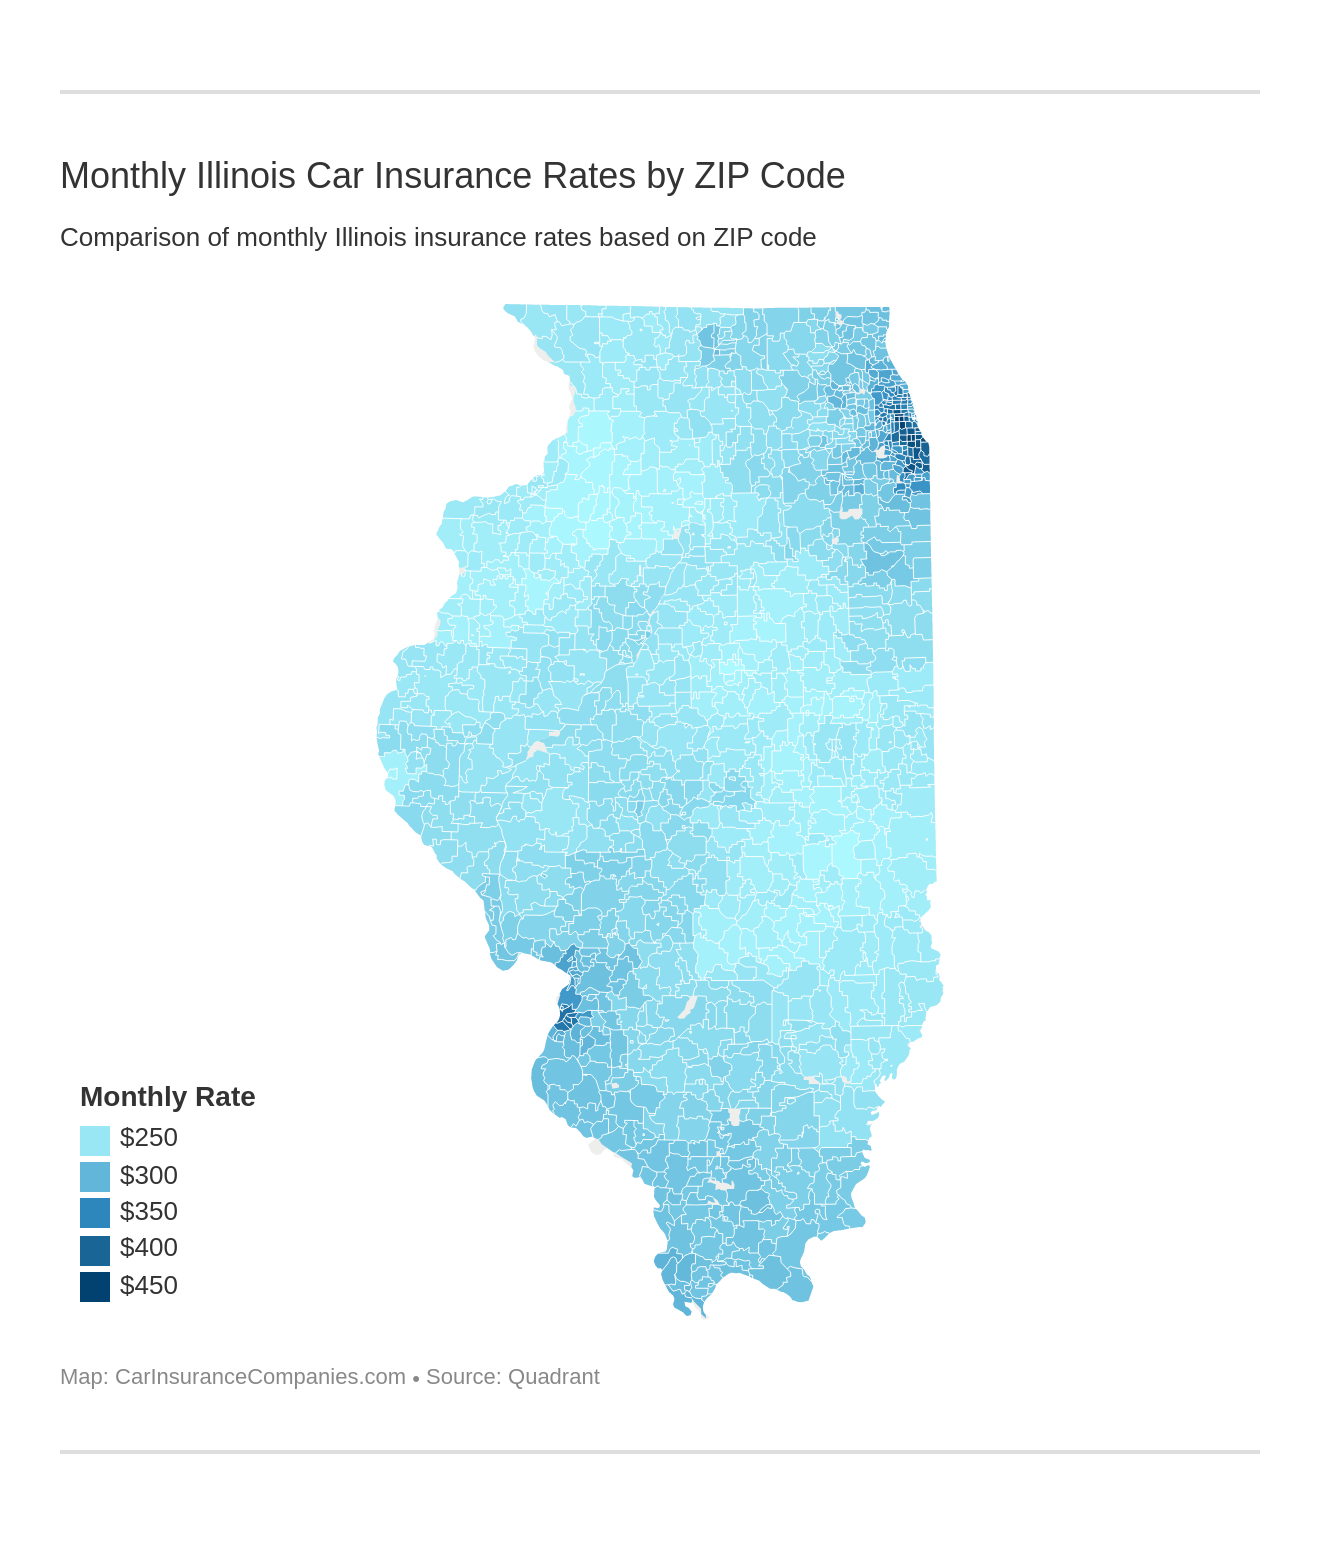 Monthly Illinois Car Insurance Rates by ZIP Code